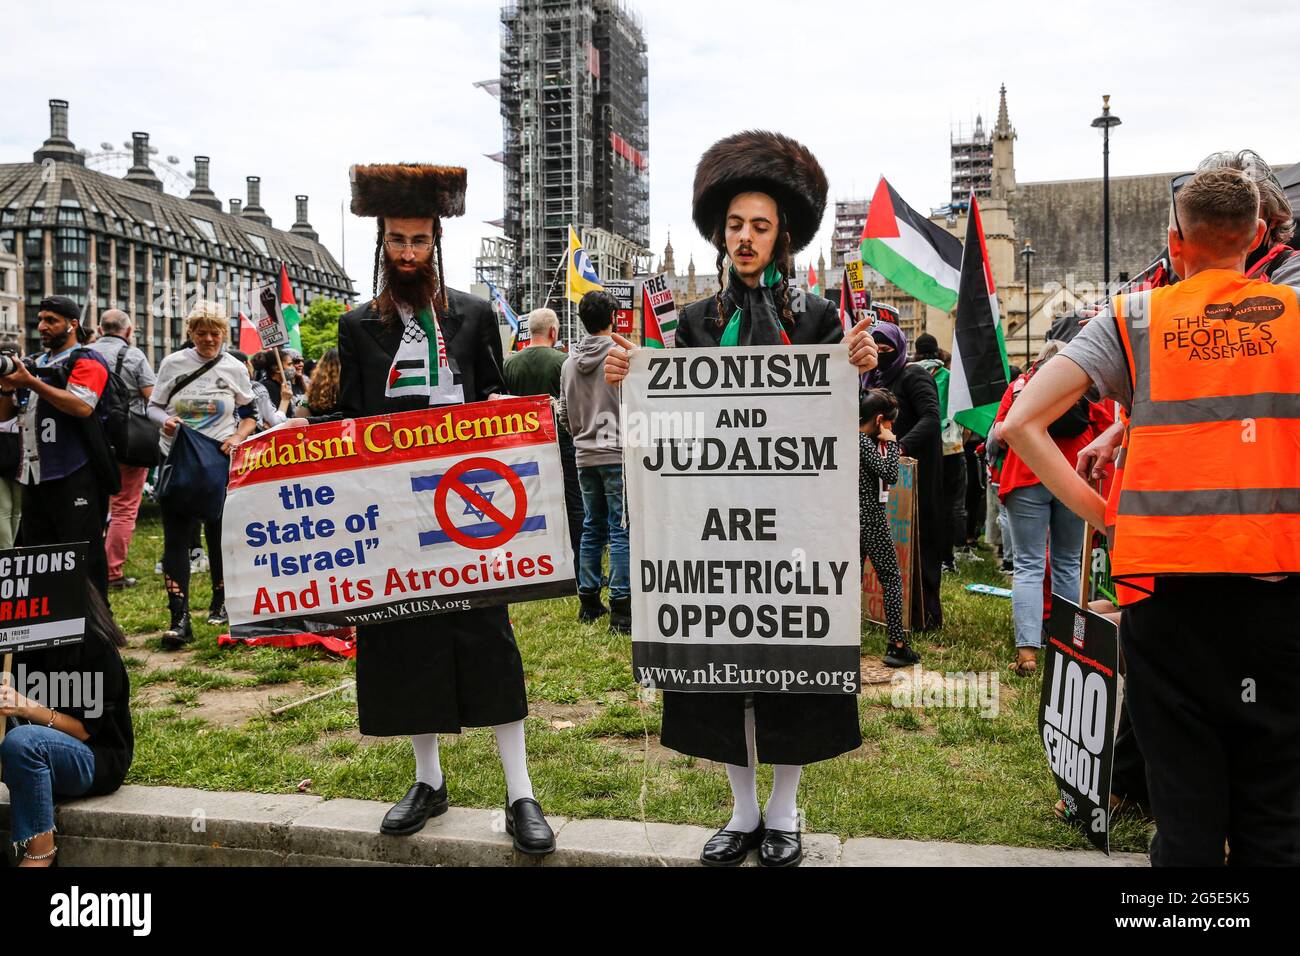 London,  UK on June 26, 2021: Anti-Zionist orthodox Jews protest during Anti-government demosntration atthe Parliament Square. The protest unites activists from many opposition left wing movements such as Kill the Bill, The People's Assembly, NHS Staff Voices, Stop the War Coalition or Extintion Rebellion. Stock Photo